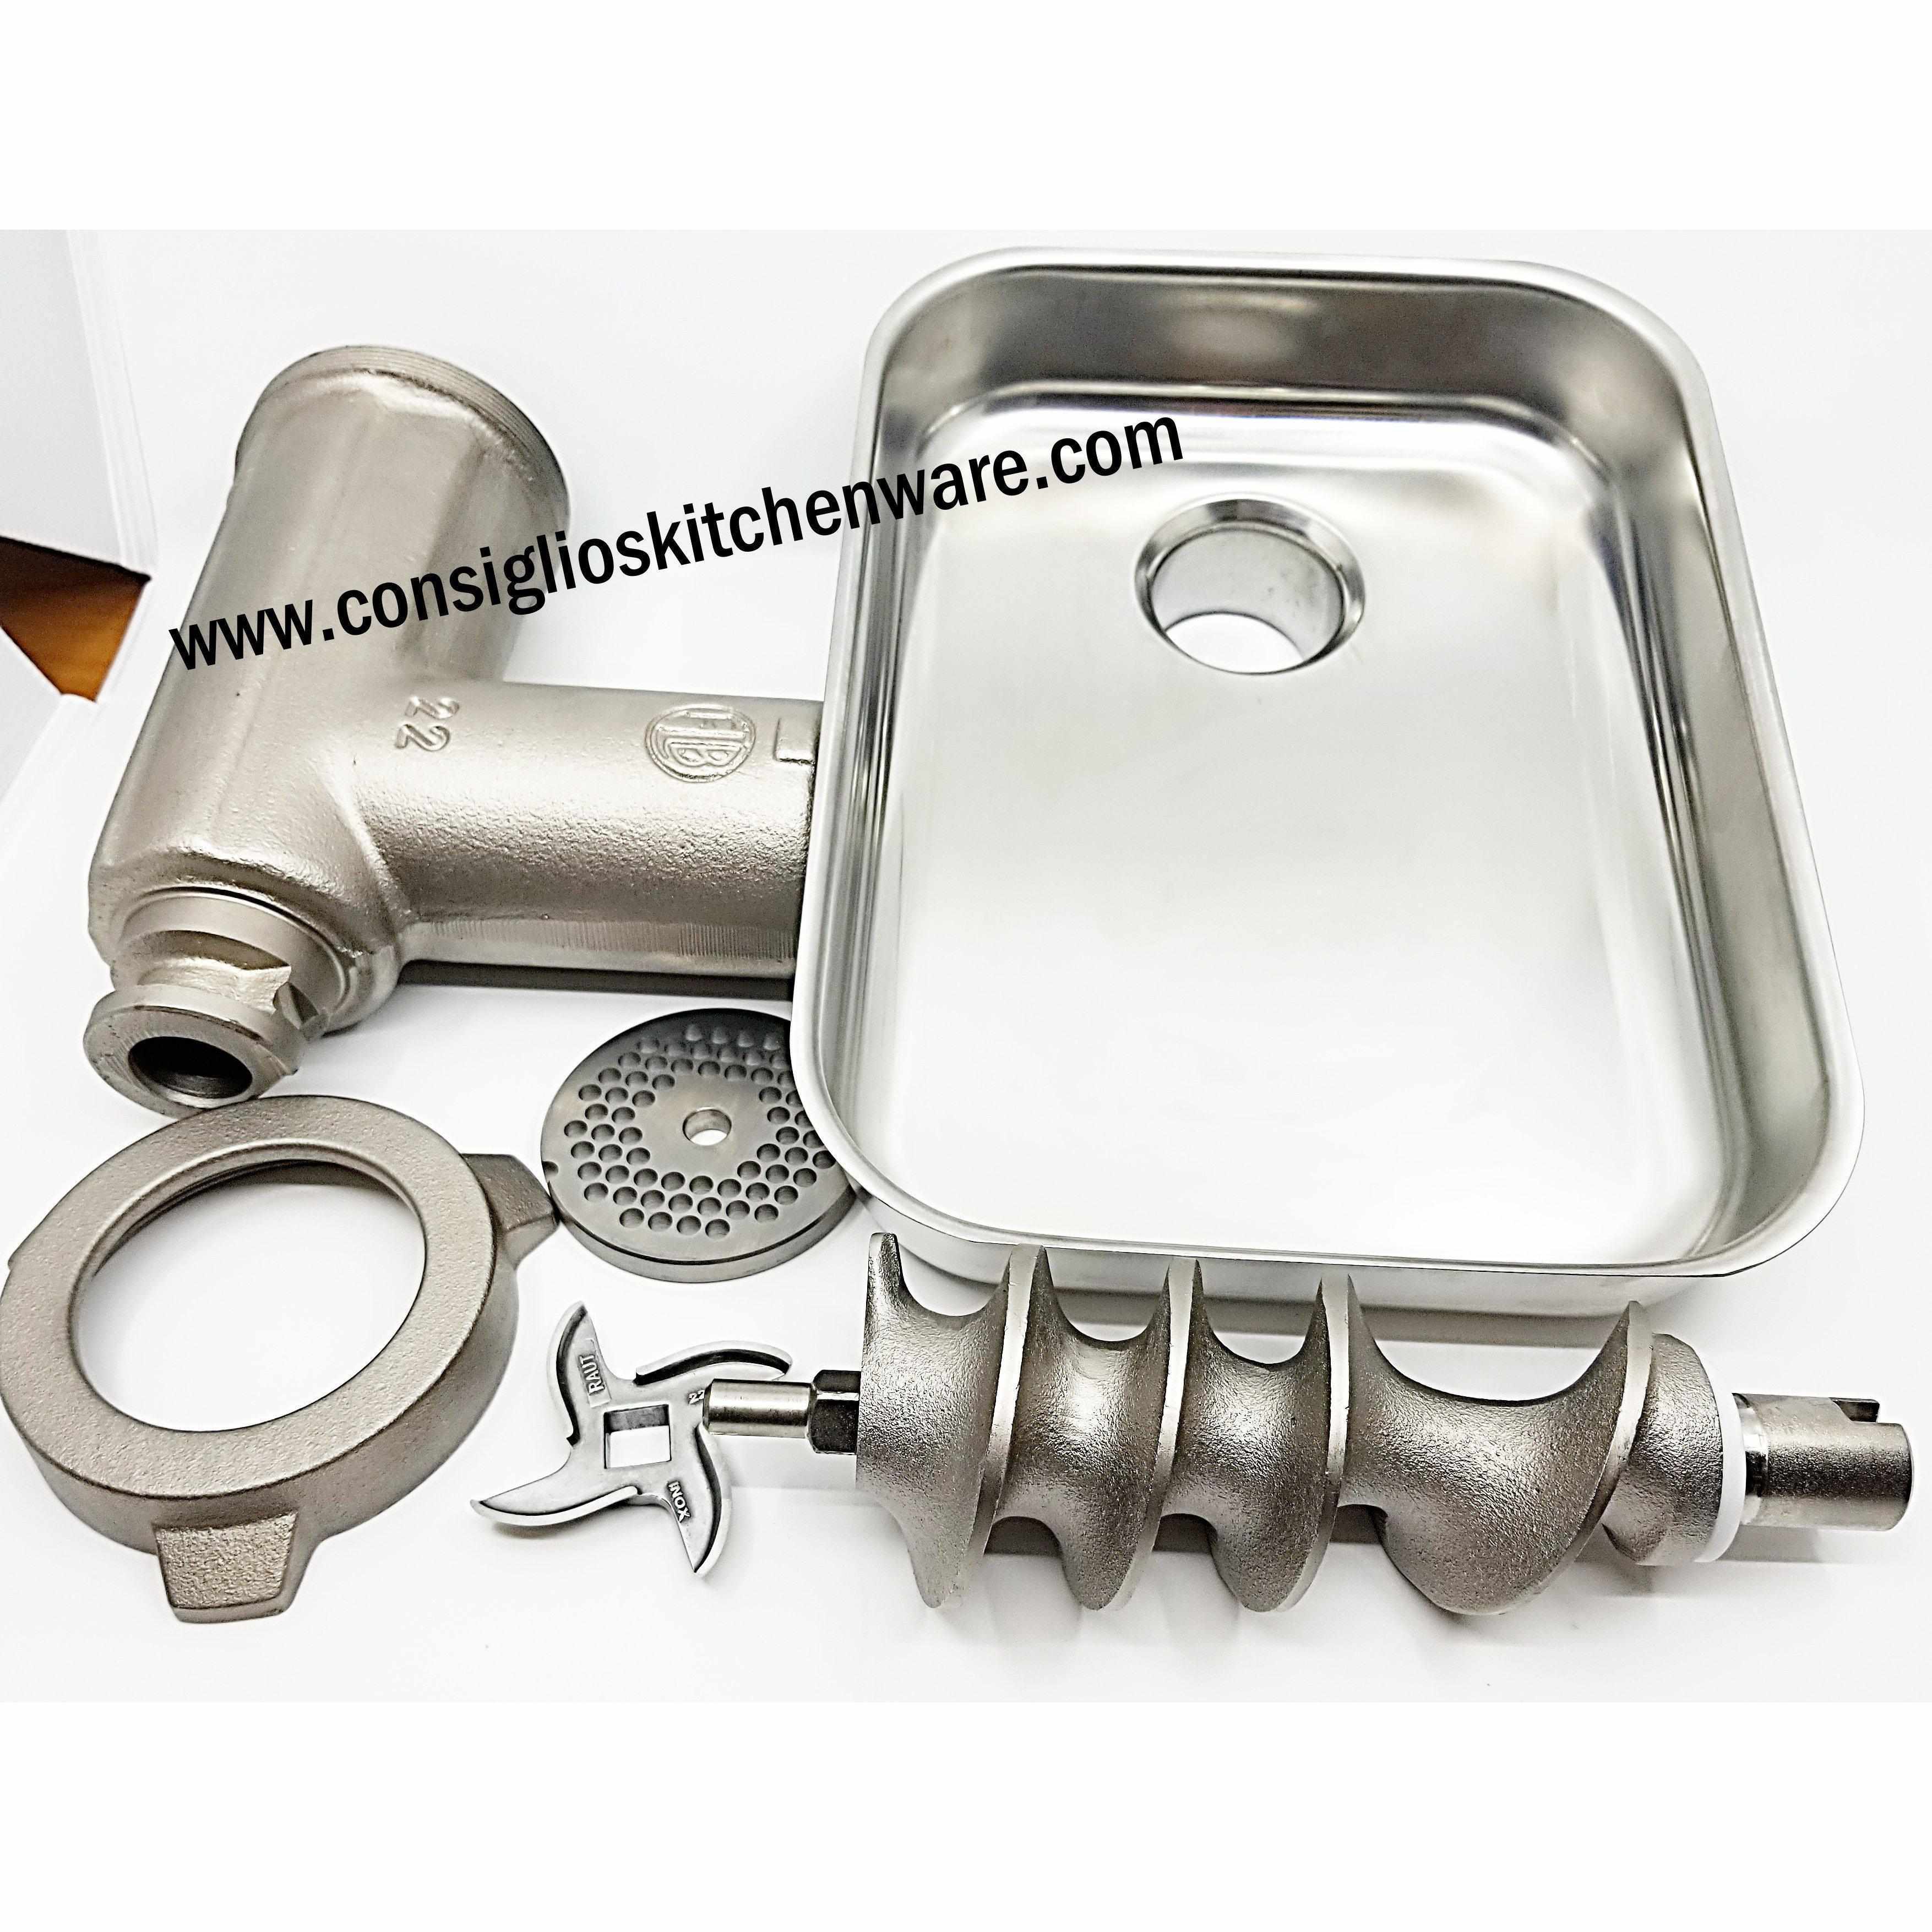 Fabio Leonardi MR0 .5HP TC12 Meat Grinder & Sausage Stuffer - Made in Italy with knives, Discs and Tubes